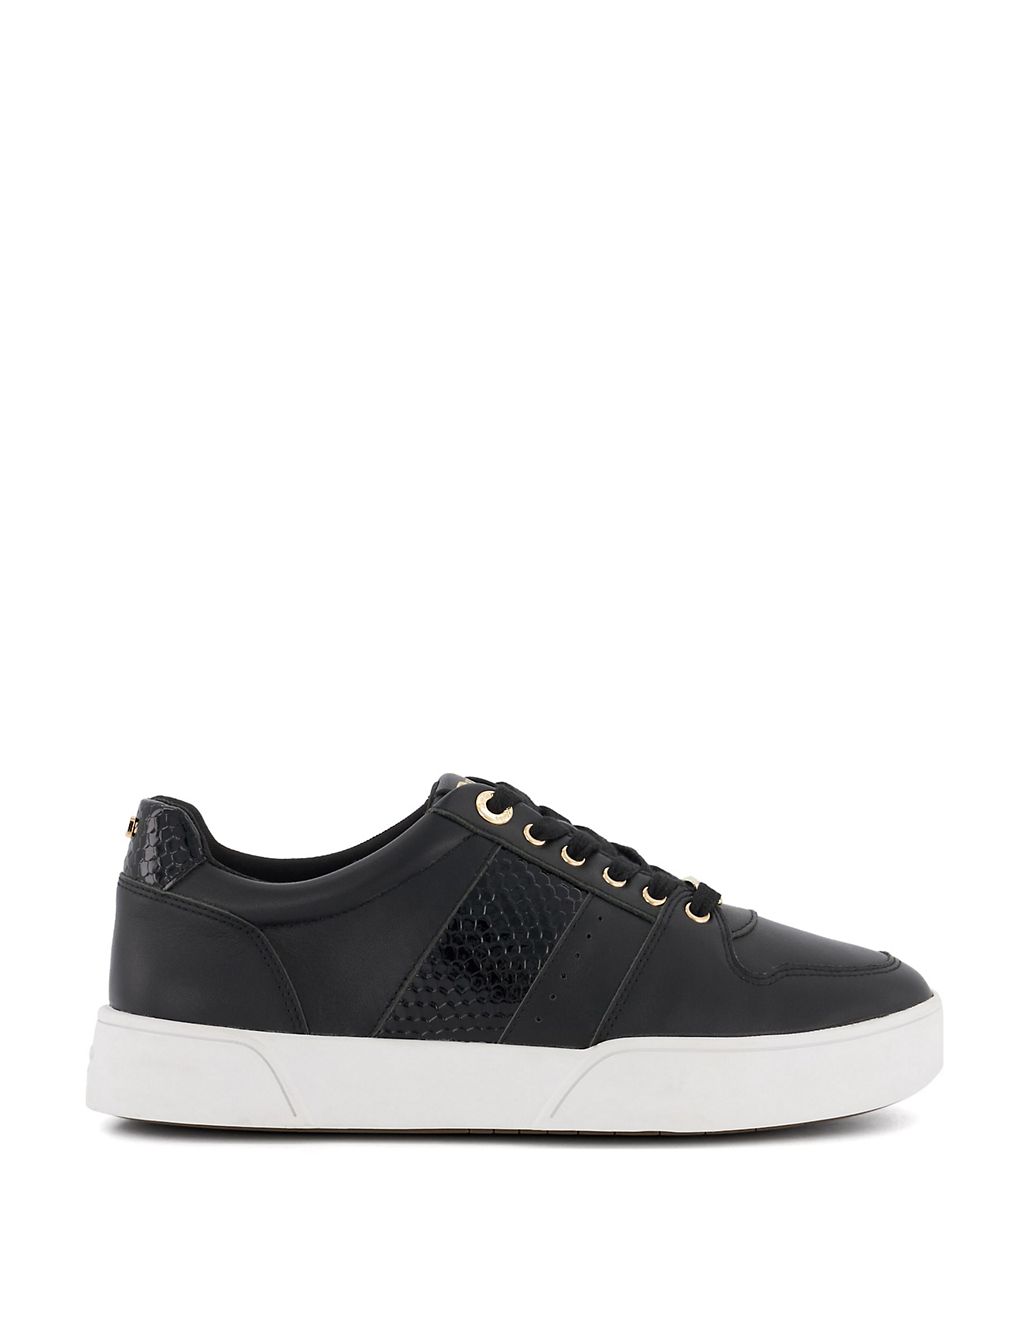 Leather Lace Up Trainers | Dune London | M&S